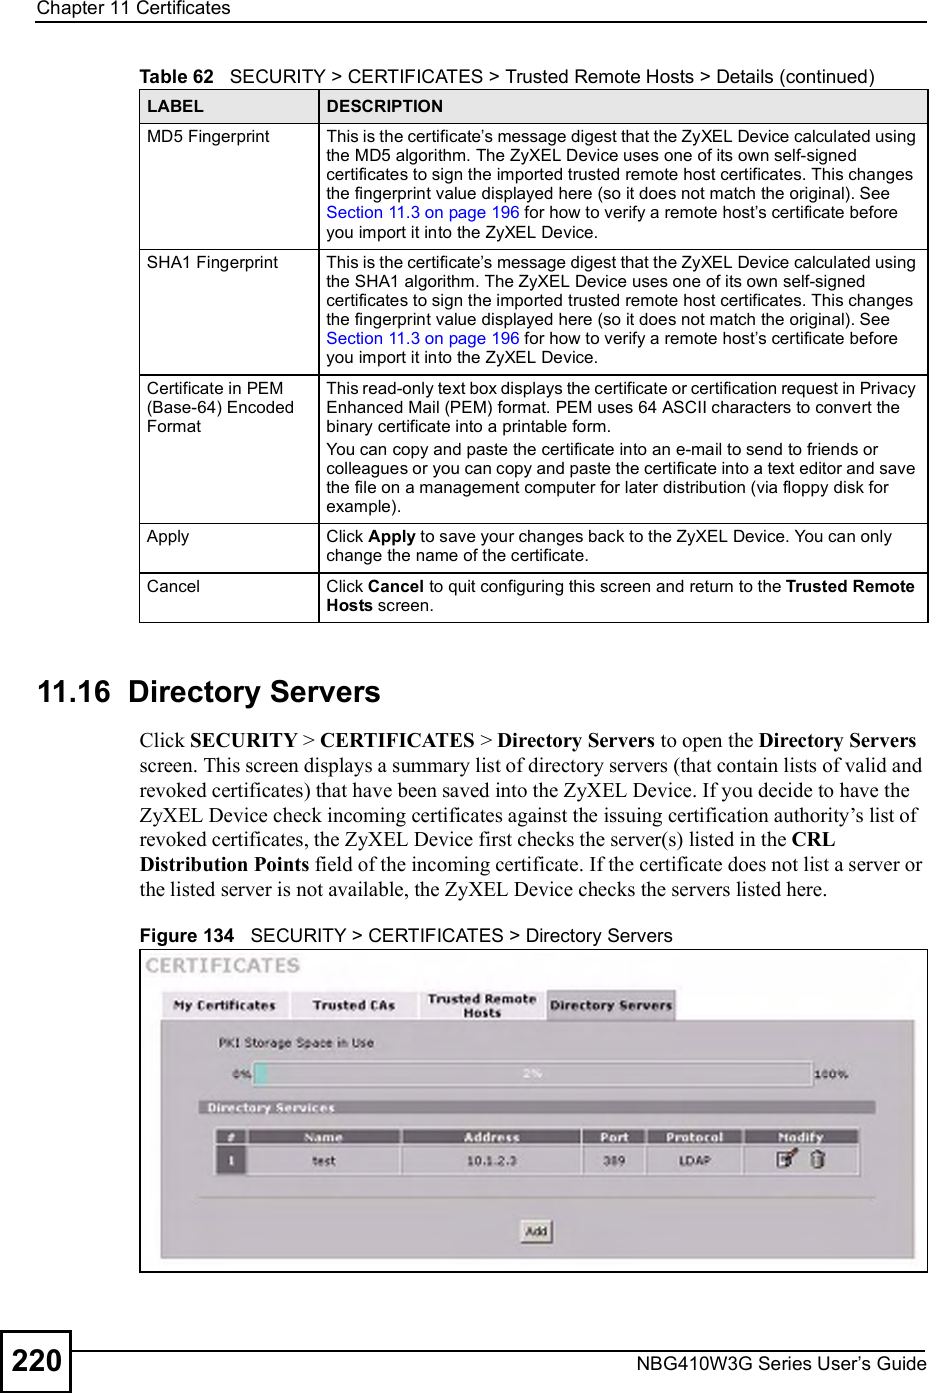 Chapter 11CertificatesNBG410W3G Series User s Guide22011.16  Directory Servers  Click SECURITY &gt; CERTIFICATES &gt; Directory Servers to open the Directory Servers screen. This screen displays a summary list of directory servers (that contain lists of valid and revoked certificates) that have been saved into the ZyXEL Device. If you decide to have the ZyXEL Device check incoming certificates against the issuing certification authority!s list of revoked certificates, the ZyXEL Device first checks the server(s) listed in the CRL Distribution Points field of the incoming certificate. If the certificate does not list a server or the listed server is not available, the ZyXEL Device checks the servers listed here.Figure 134   SECURITY &gt; CERTIFICATES &gt; Directory ServersMD5 FingerprintThis is the certificate s message digest that the ZyXEL Device calculated using the MD5 algorithm. The ZyXEL Device uses one of its own self-signed certificates to sign the imported trusted remote host certificates. This changes the fingerprint value displayed here (so it does not match the original). See Section 11.3 on page 196 for how to verify a remote host s certificate before you import it into the ZyXEL Device. SHA1 FingerprintThis is the certificate s message digest that the ZyXEL Device calculated using the SHA1 algorithm. The ZyXEL Device uses one of its own self-signed certificates to sign the imported trusted remote host certificates. This changes the fingerprint value displayed here (so it does not match the original). See Section 11.3 on page 196 for how to verify a remote host s certificate before you import it into the ZyXEL Device. Certificate in PEM (Base-64) Encoded FormatThis read-only text box displays the certificate or certification request in Privacy Enhanced Mail (PEM) format. PEM uses 64 ASCII characters to convert the binary certificate into a printable form. You can copy and paste the certificate into an e-mail to send to friends or colleagues or you can copy and paste the certificate into a text editor and save the file on a management computer for later distribution (via floppy disk for example).ApplyClick Apply to save your changes back to the ZyXEL Device. You can only change the name of the certificate.CancelClick Cancel to quit configuring this screen and return to the Trusted Remote Hosts screen.Table 62   SECURITY &gt; CERTIFICATES &gt; Trusted Remote Hosts &gt; Details (continued)LABEL DESCRIPTION